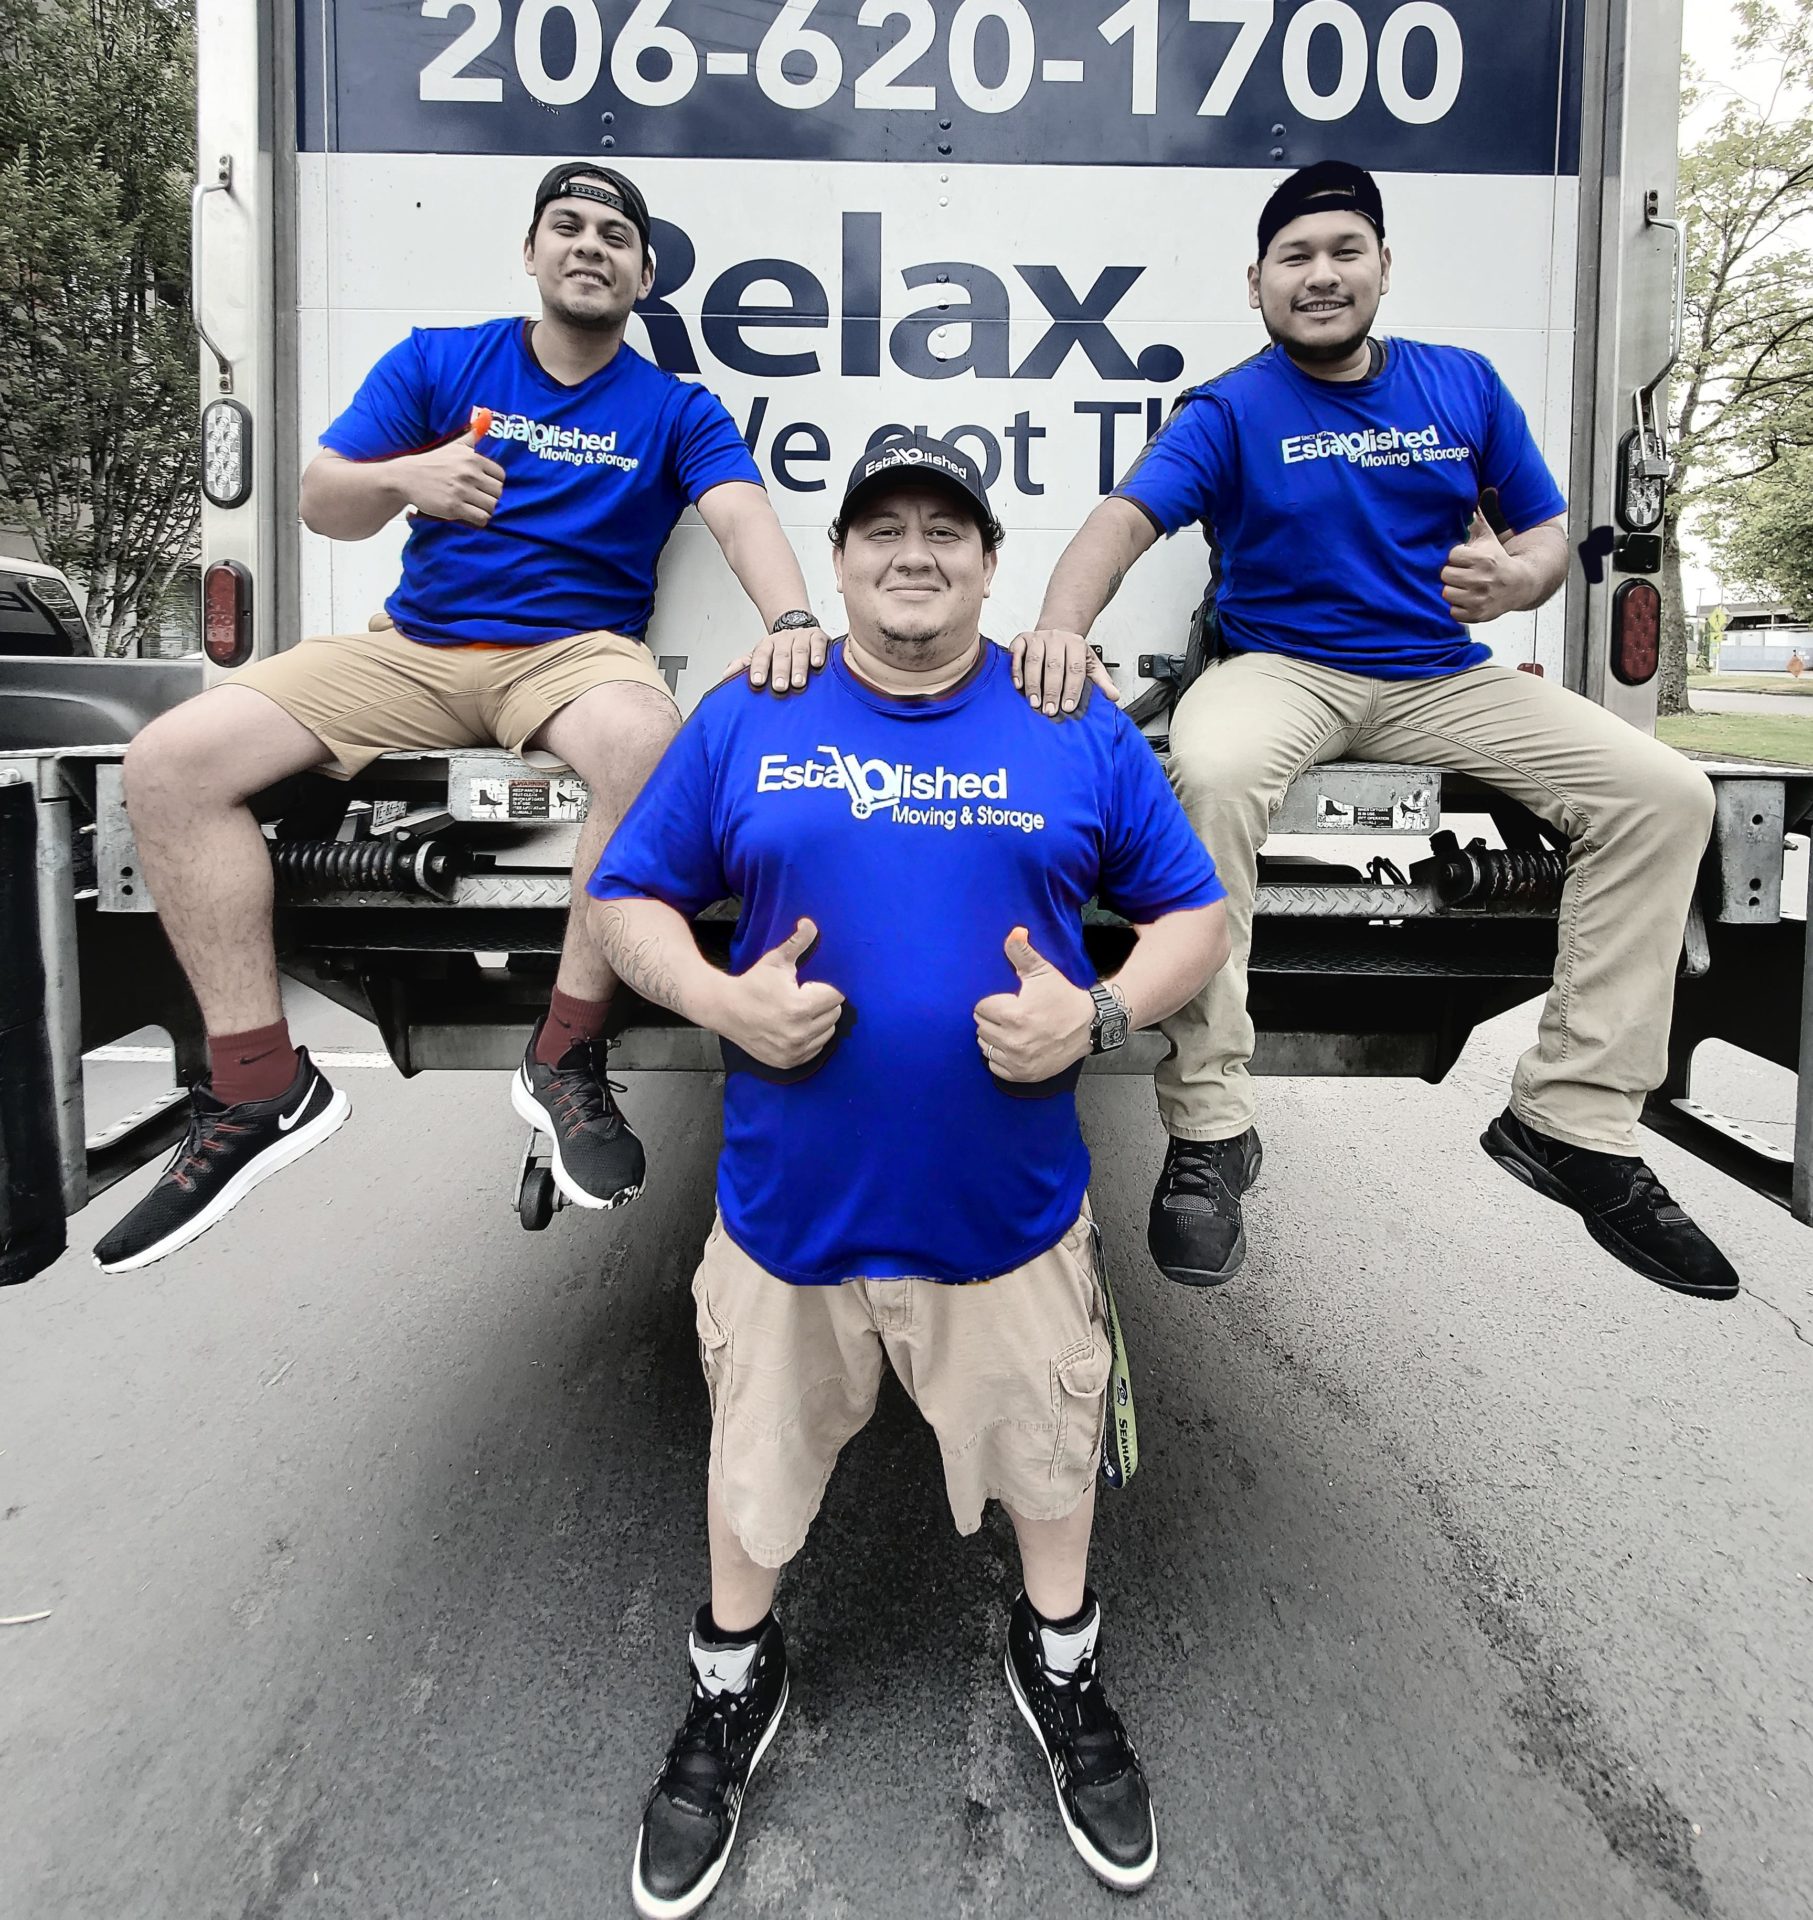 established moving & storage employees give a thumbs up behind their truck